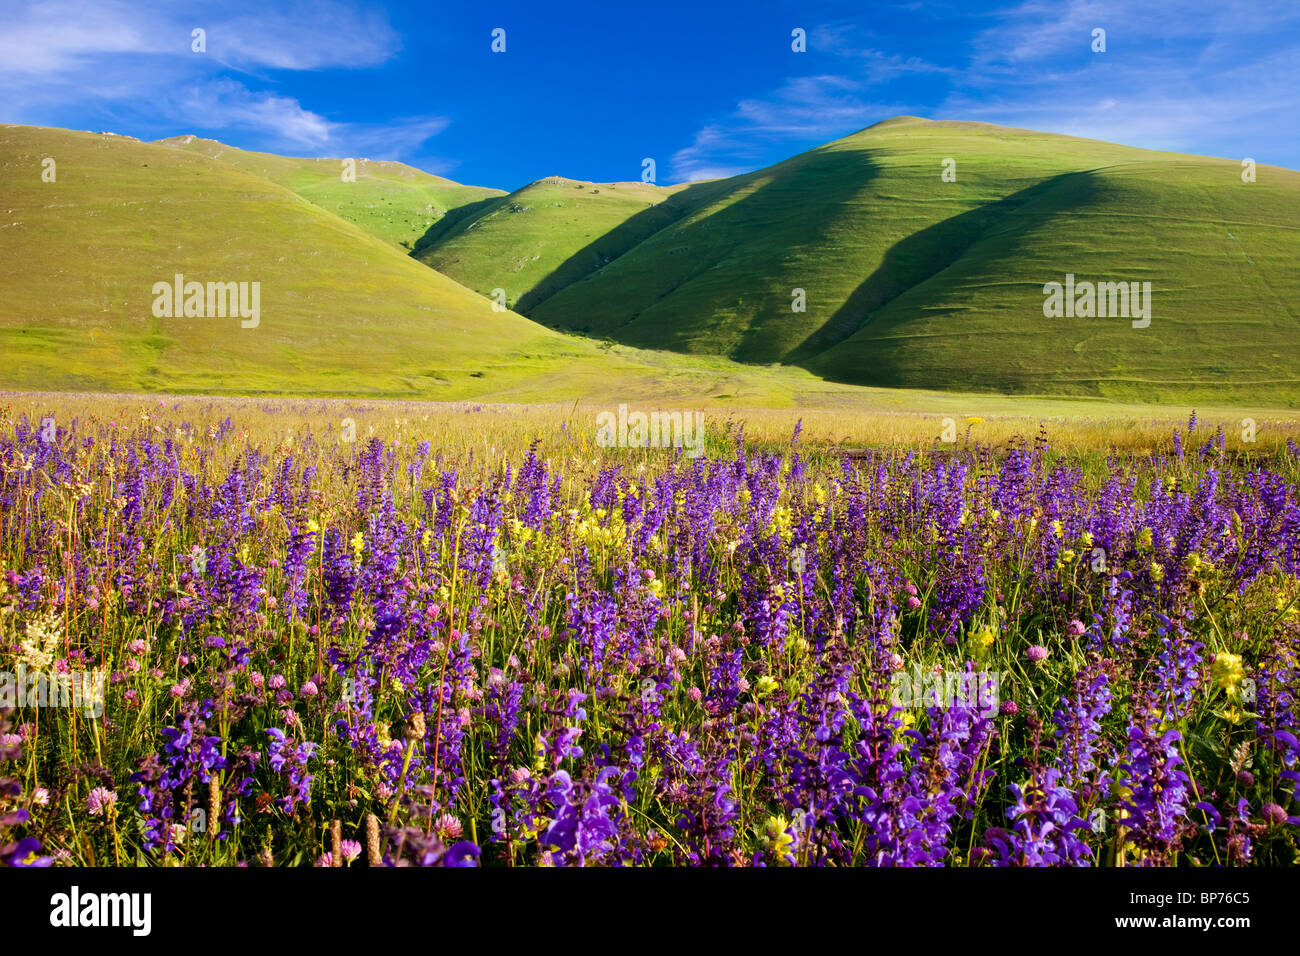 Acres of wildflowers in the Piano Grande near Castelluccio, part of the Monti Sibillini National Park, Umbria Italy Stock Photo